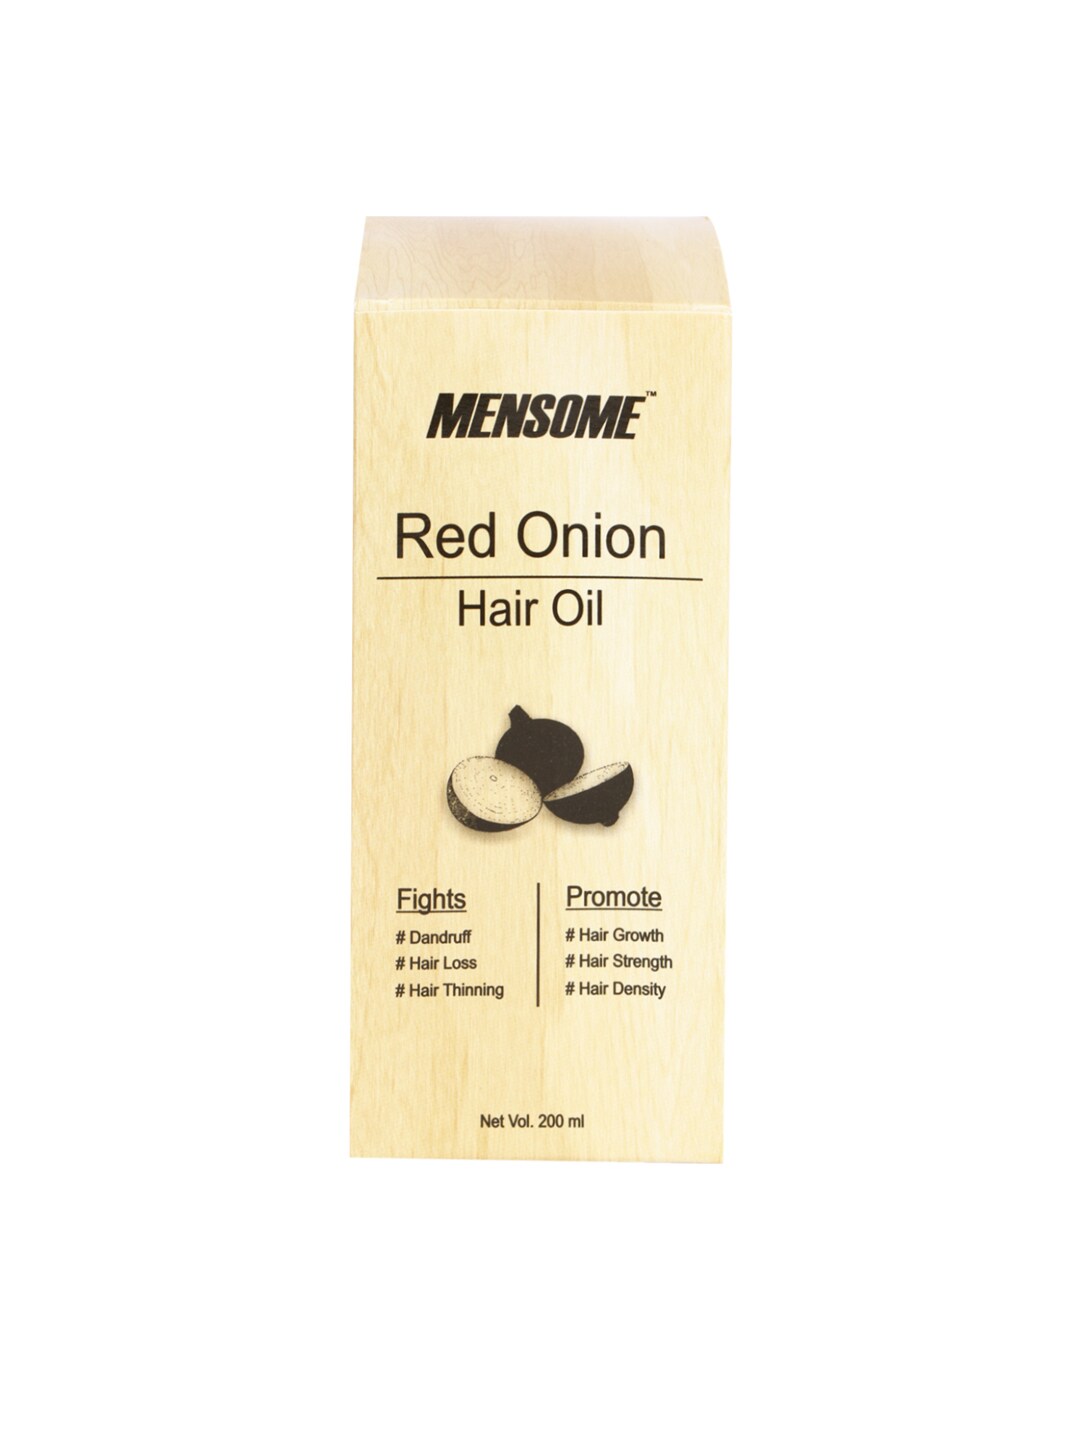 MENSOME Red Onion Hair Oil Price in India